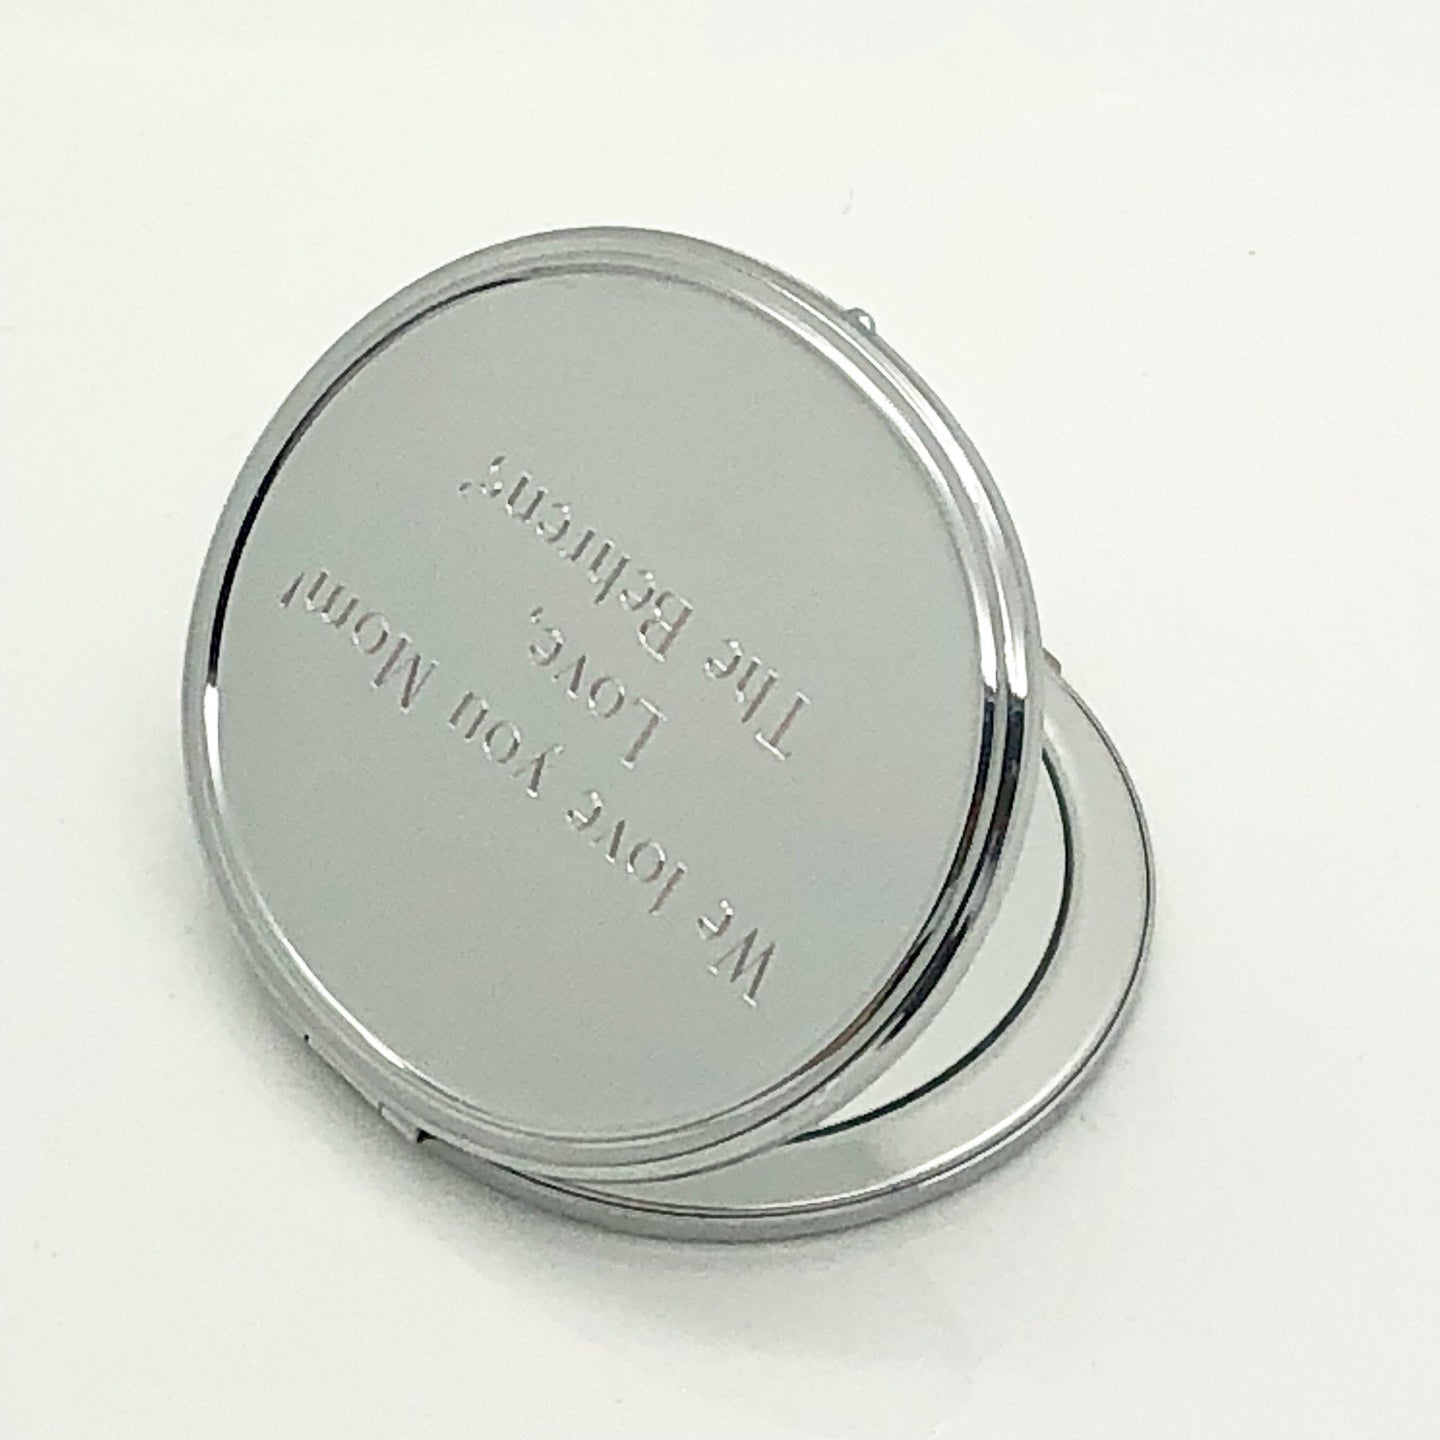 Personalized oval compact mirror, engraved with text